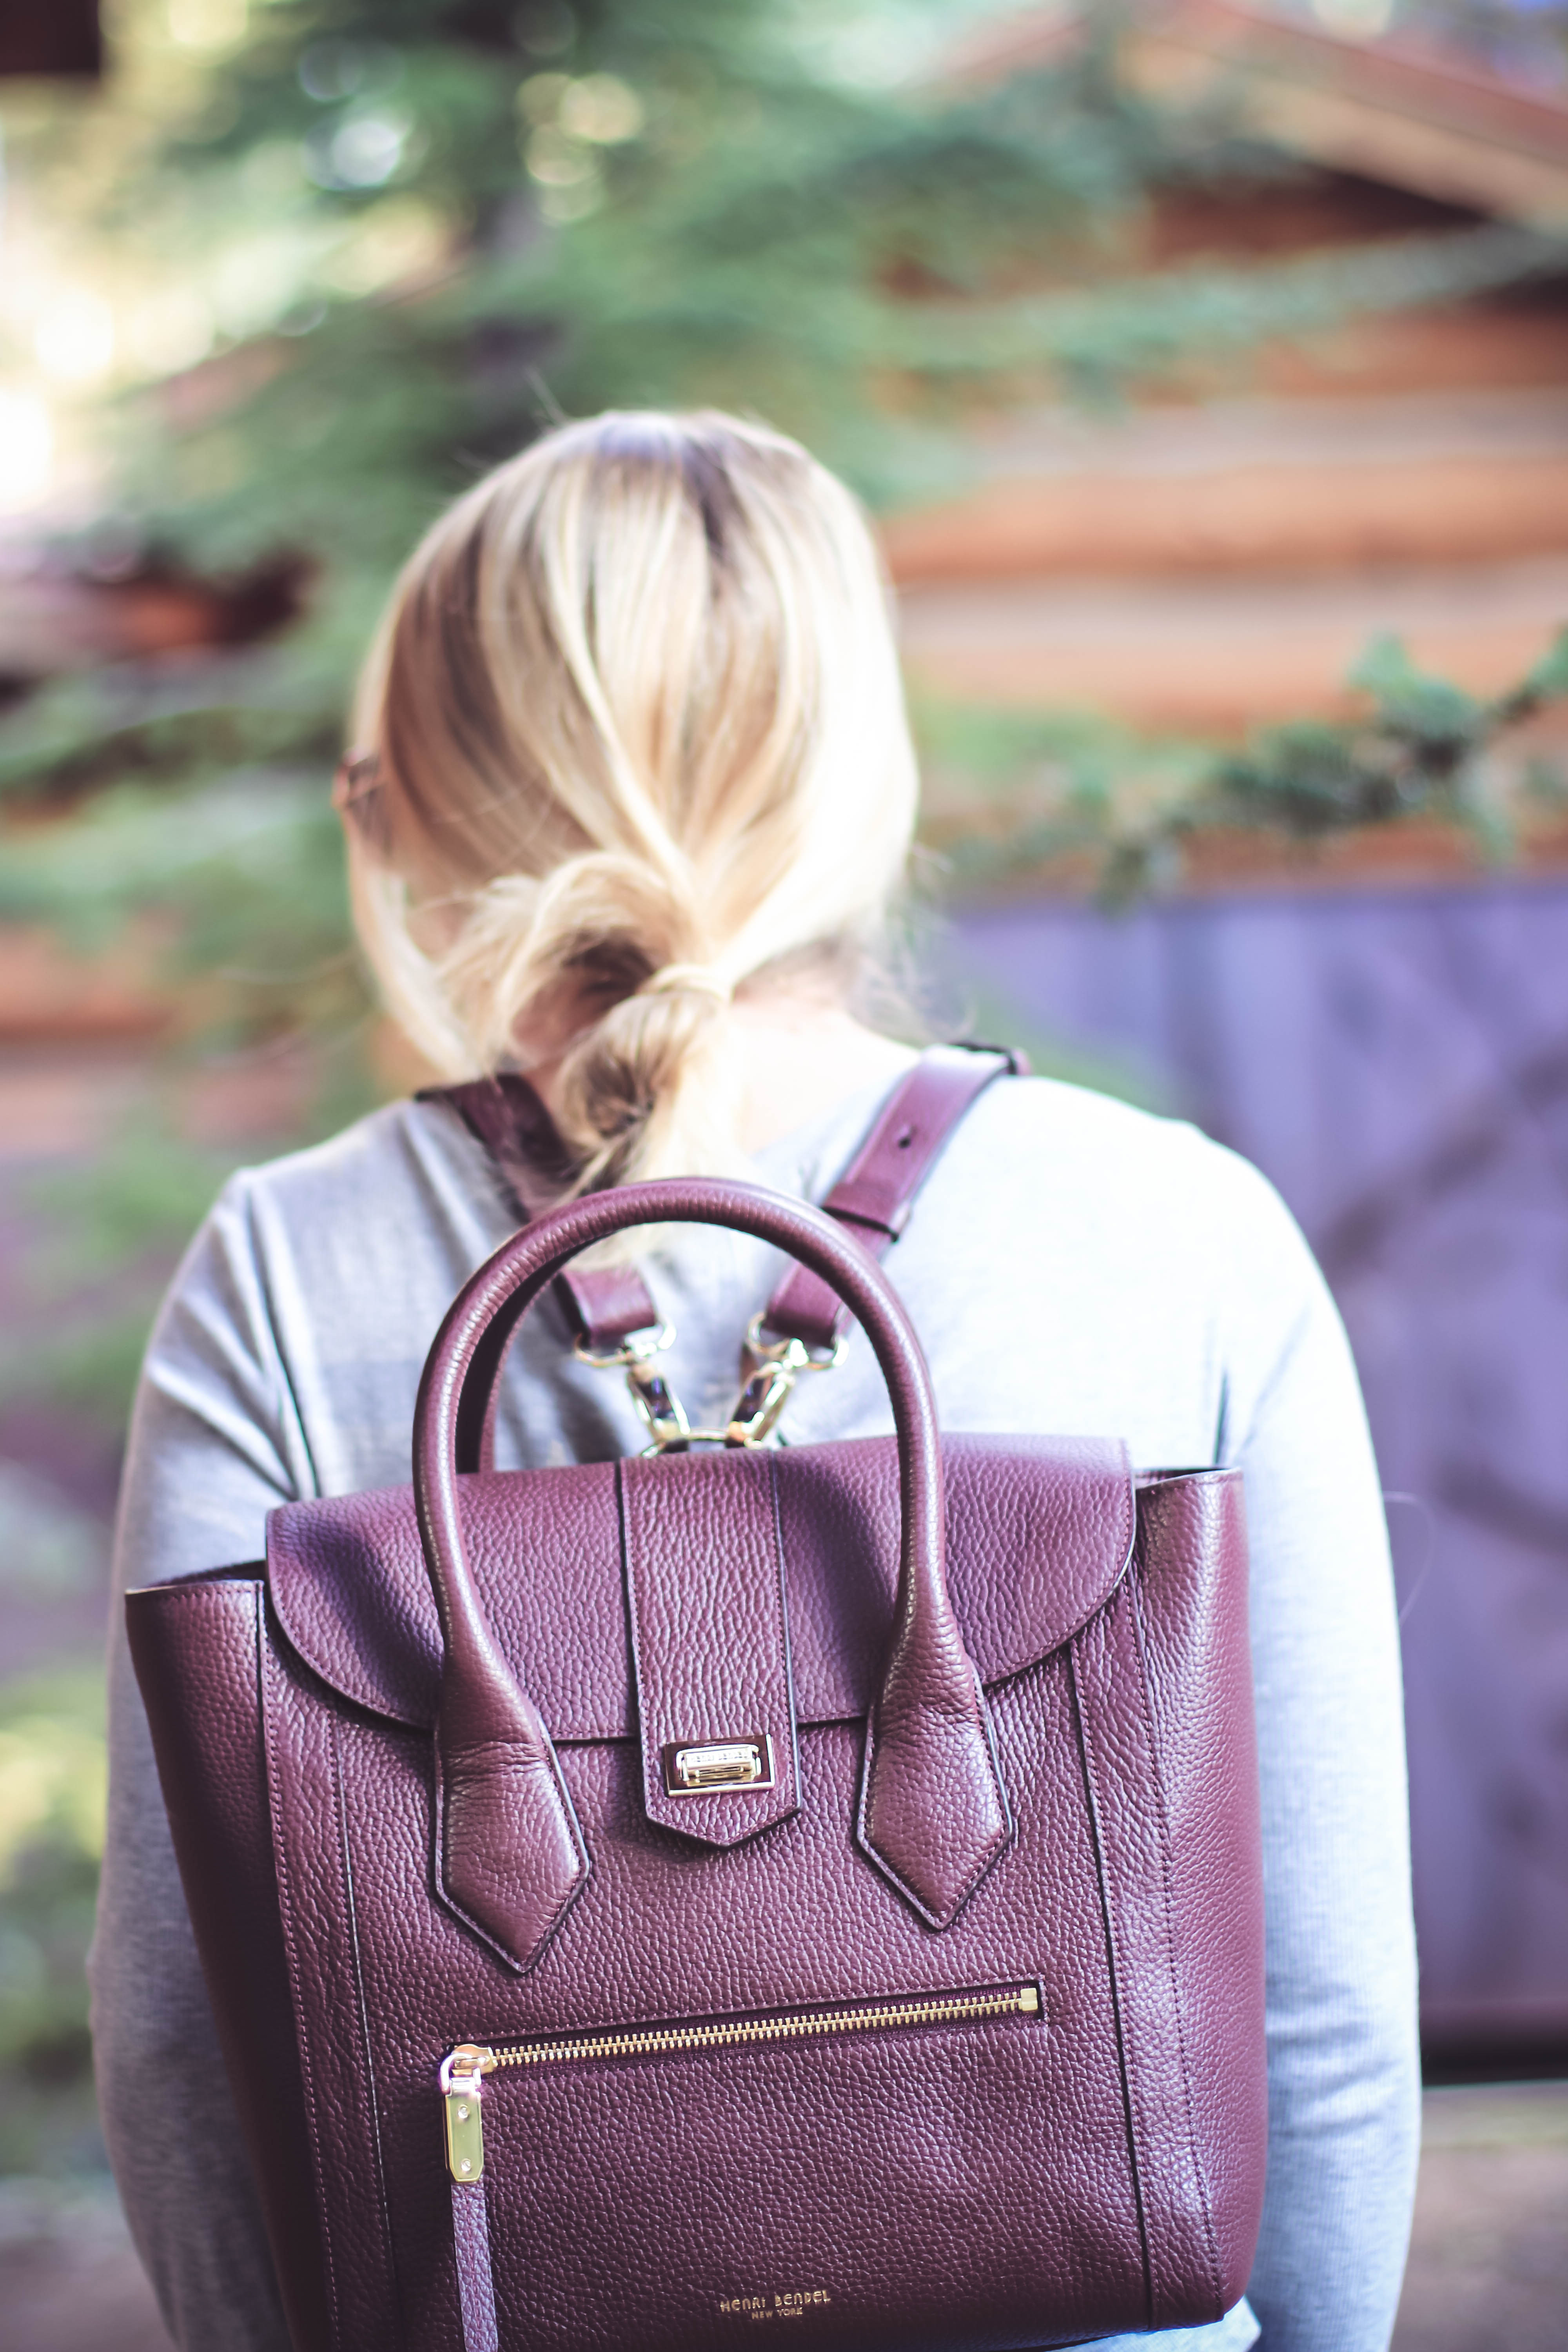 Chic Backpacks for grown ups, this one by Henri Bendel, with Levi's jeans, fashion blogger, Erin Busbee of Busbee Style in Telluride, Colorado